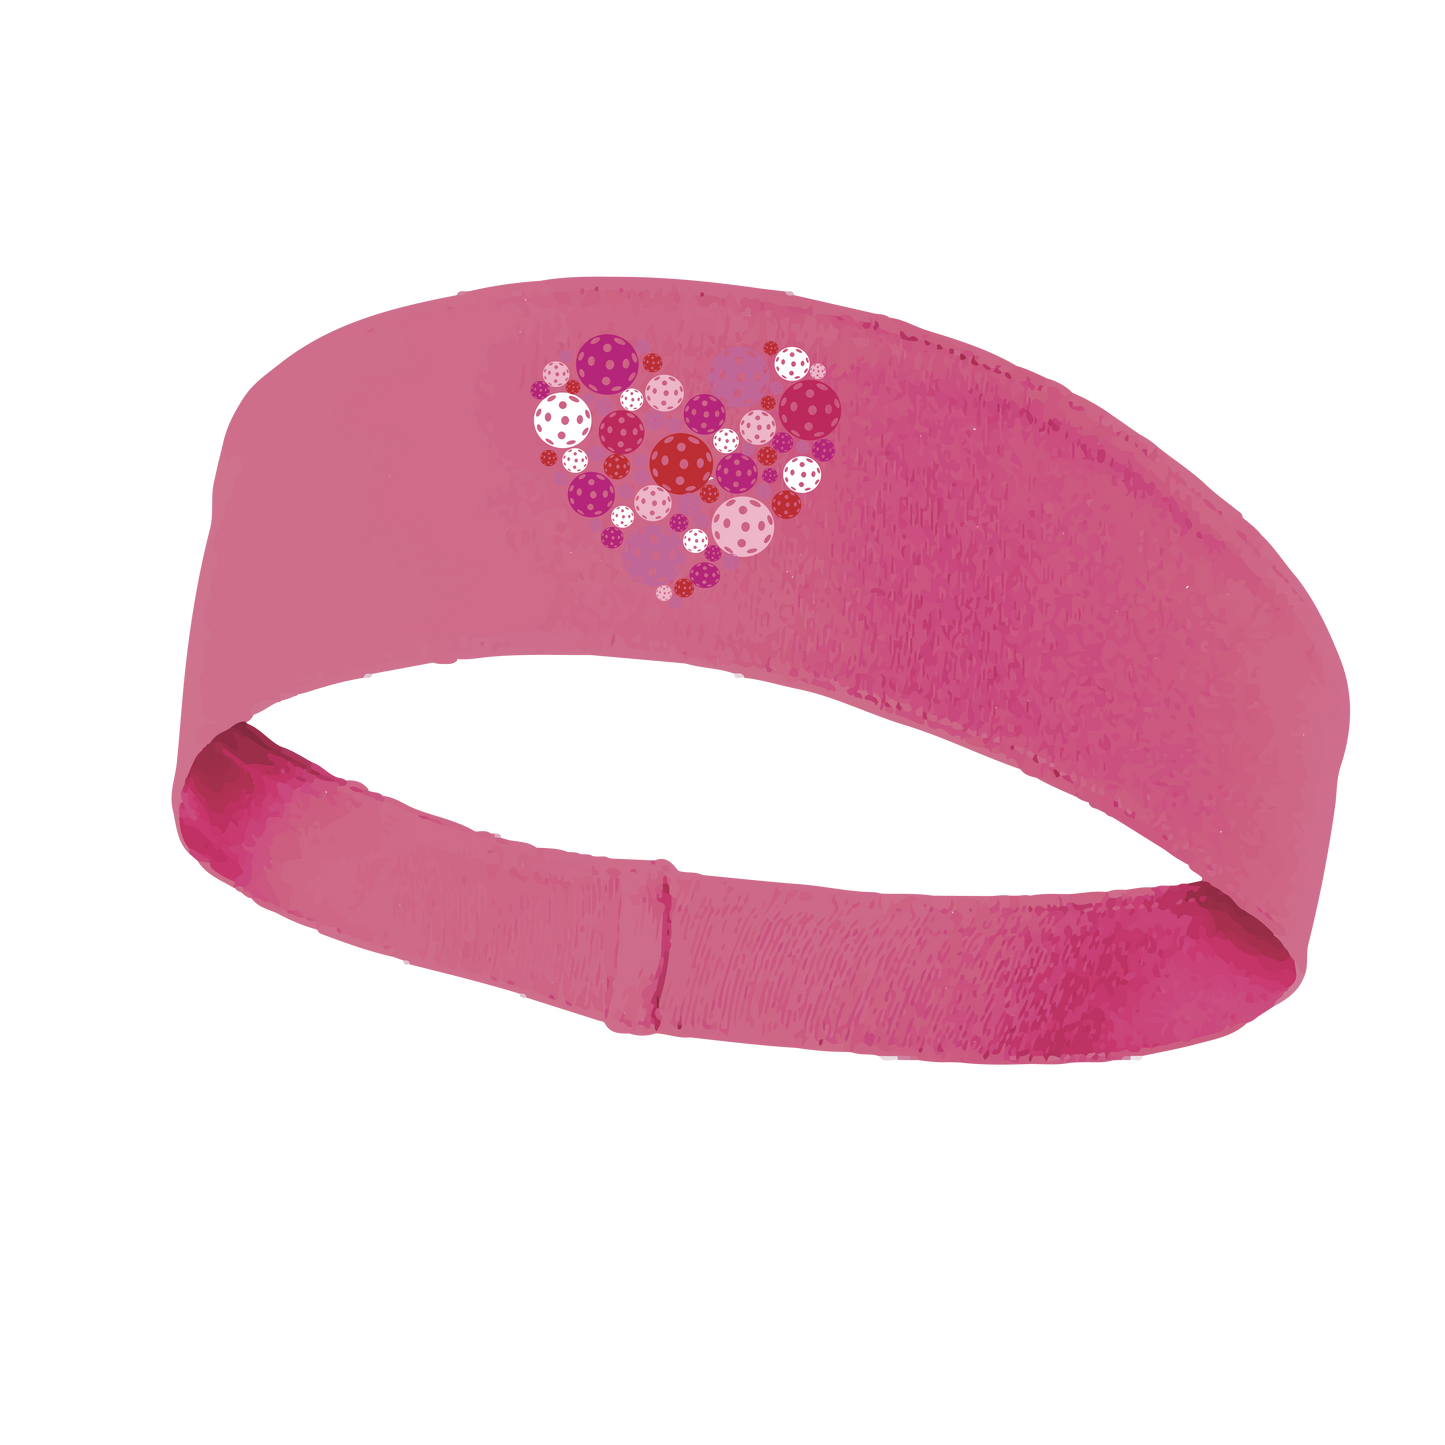 Tailored for a precise fit, this lightweight and moisture-wicking headband features an attractive pickleball design. Finished with single-needle top-stitching, it is available in various colors. Pickleball enthusiasts can express their passion for the sport with this stylish accessory.